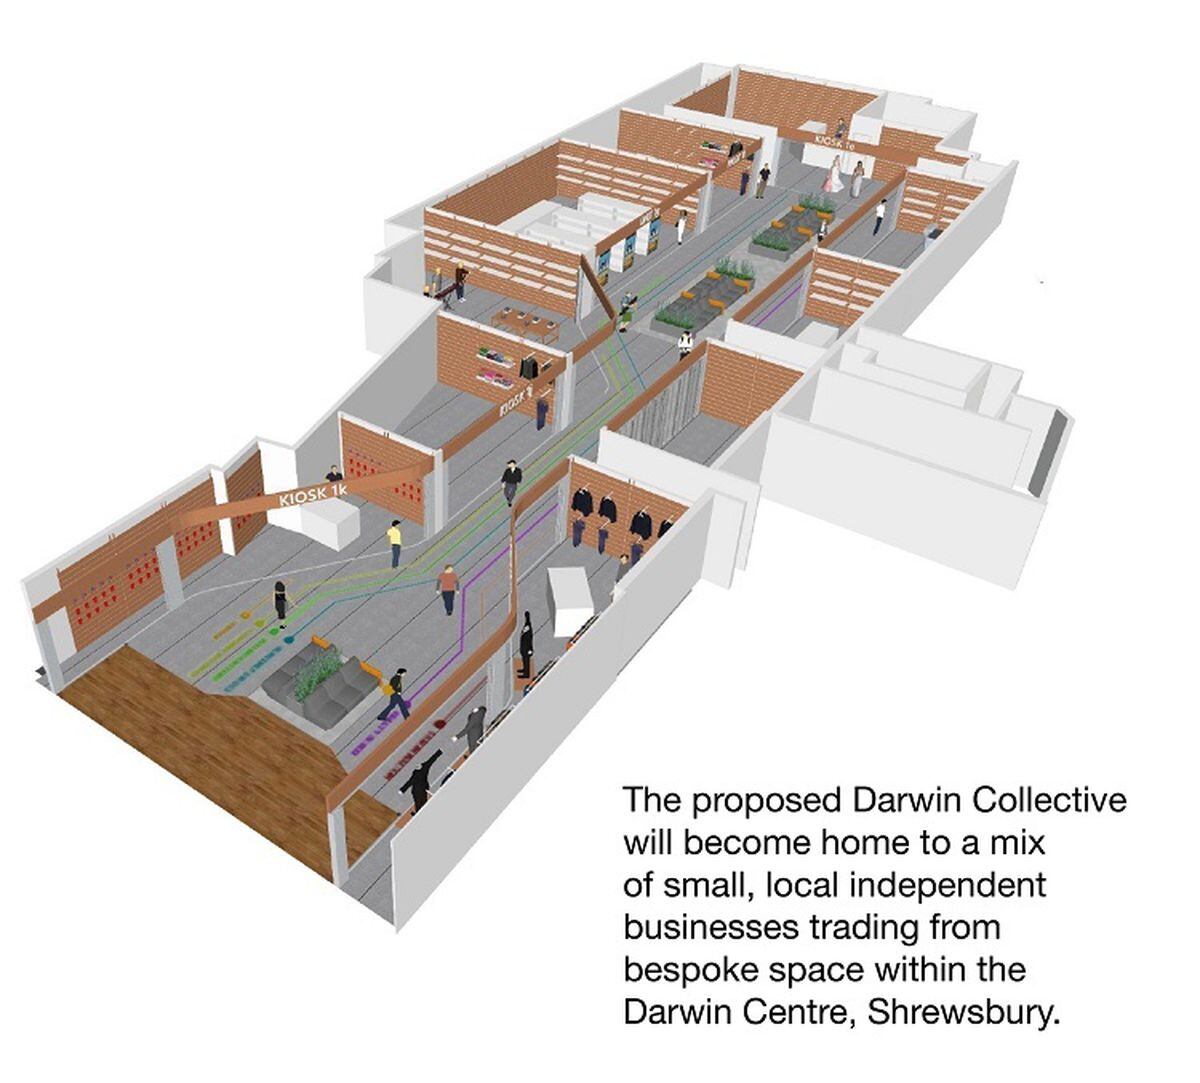 The proposed Darwin Collective will be home to a mix of businesses